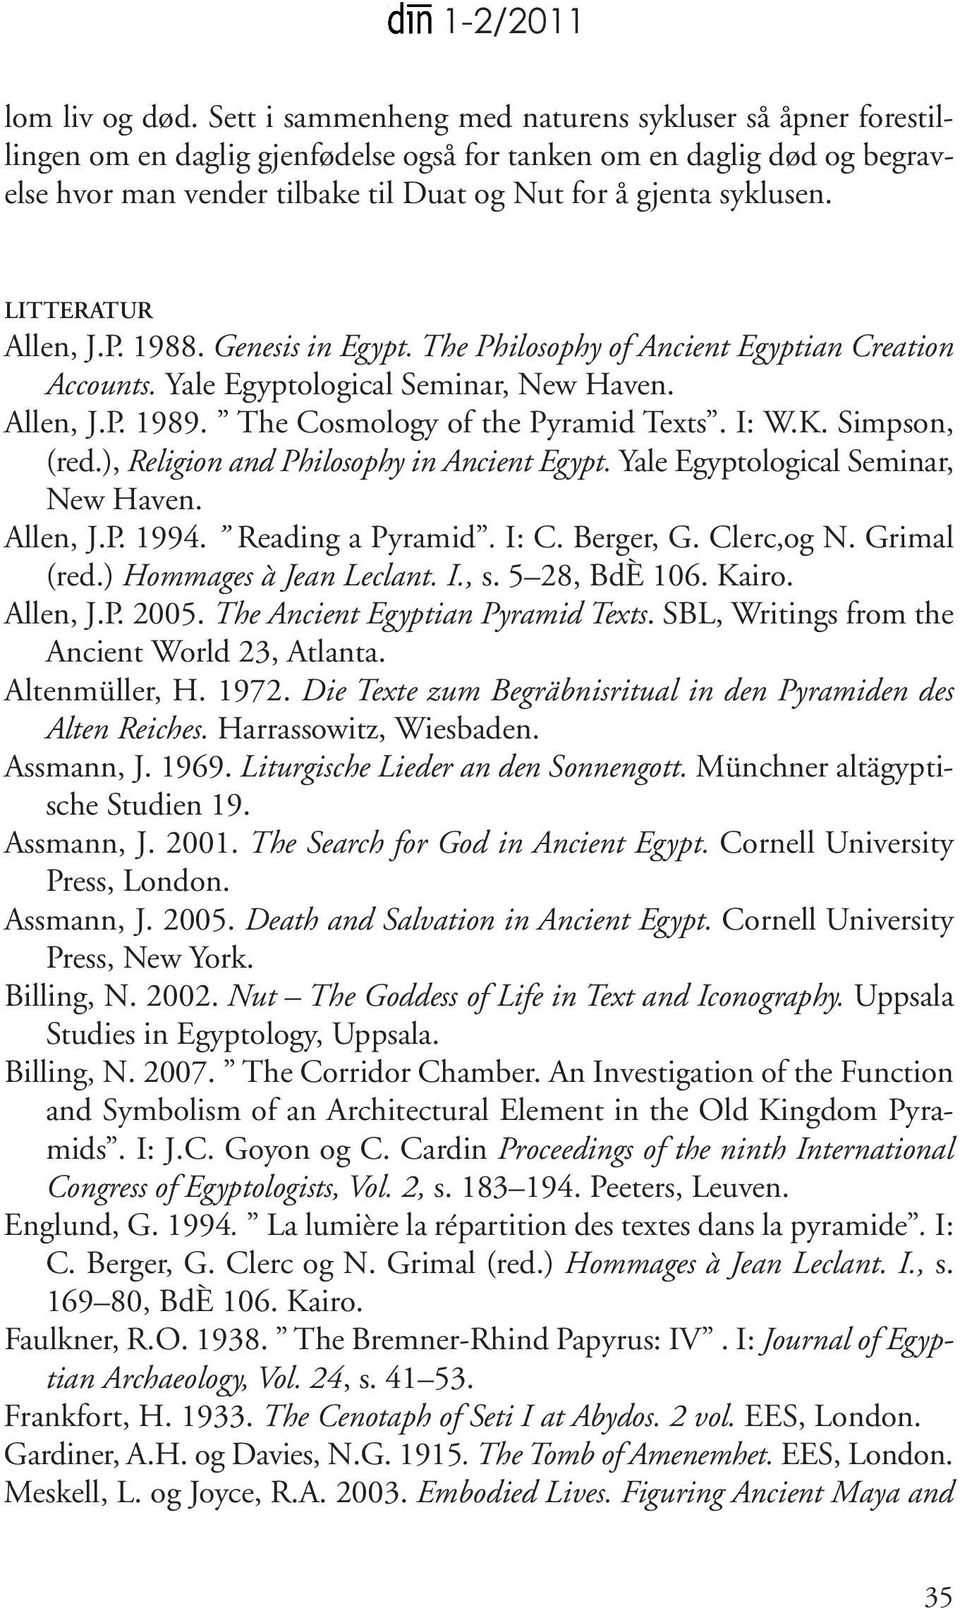 LITTERATUR Allen, J.P. 1988. Genesis in Egypt. The Philosophy of Ancient Egyptian Creation Accounts. Yale Egyptological Seminar, New Haven. Allen, J.P. 1989. The Cosmology of the Pyramid Texts. I: W.